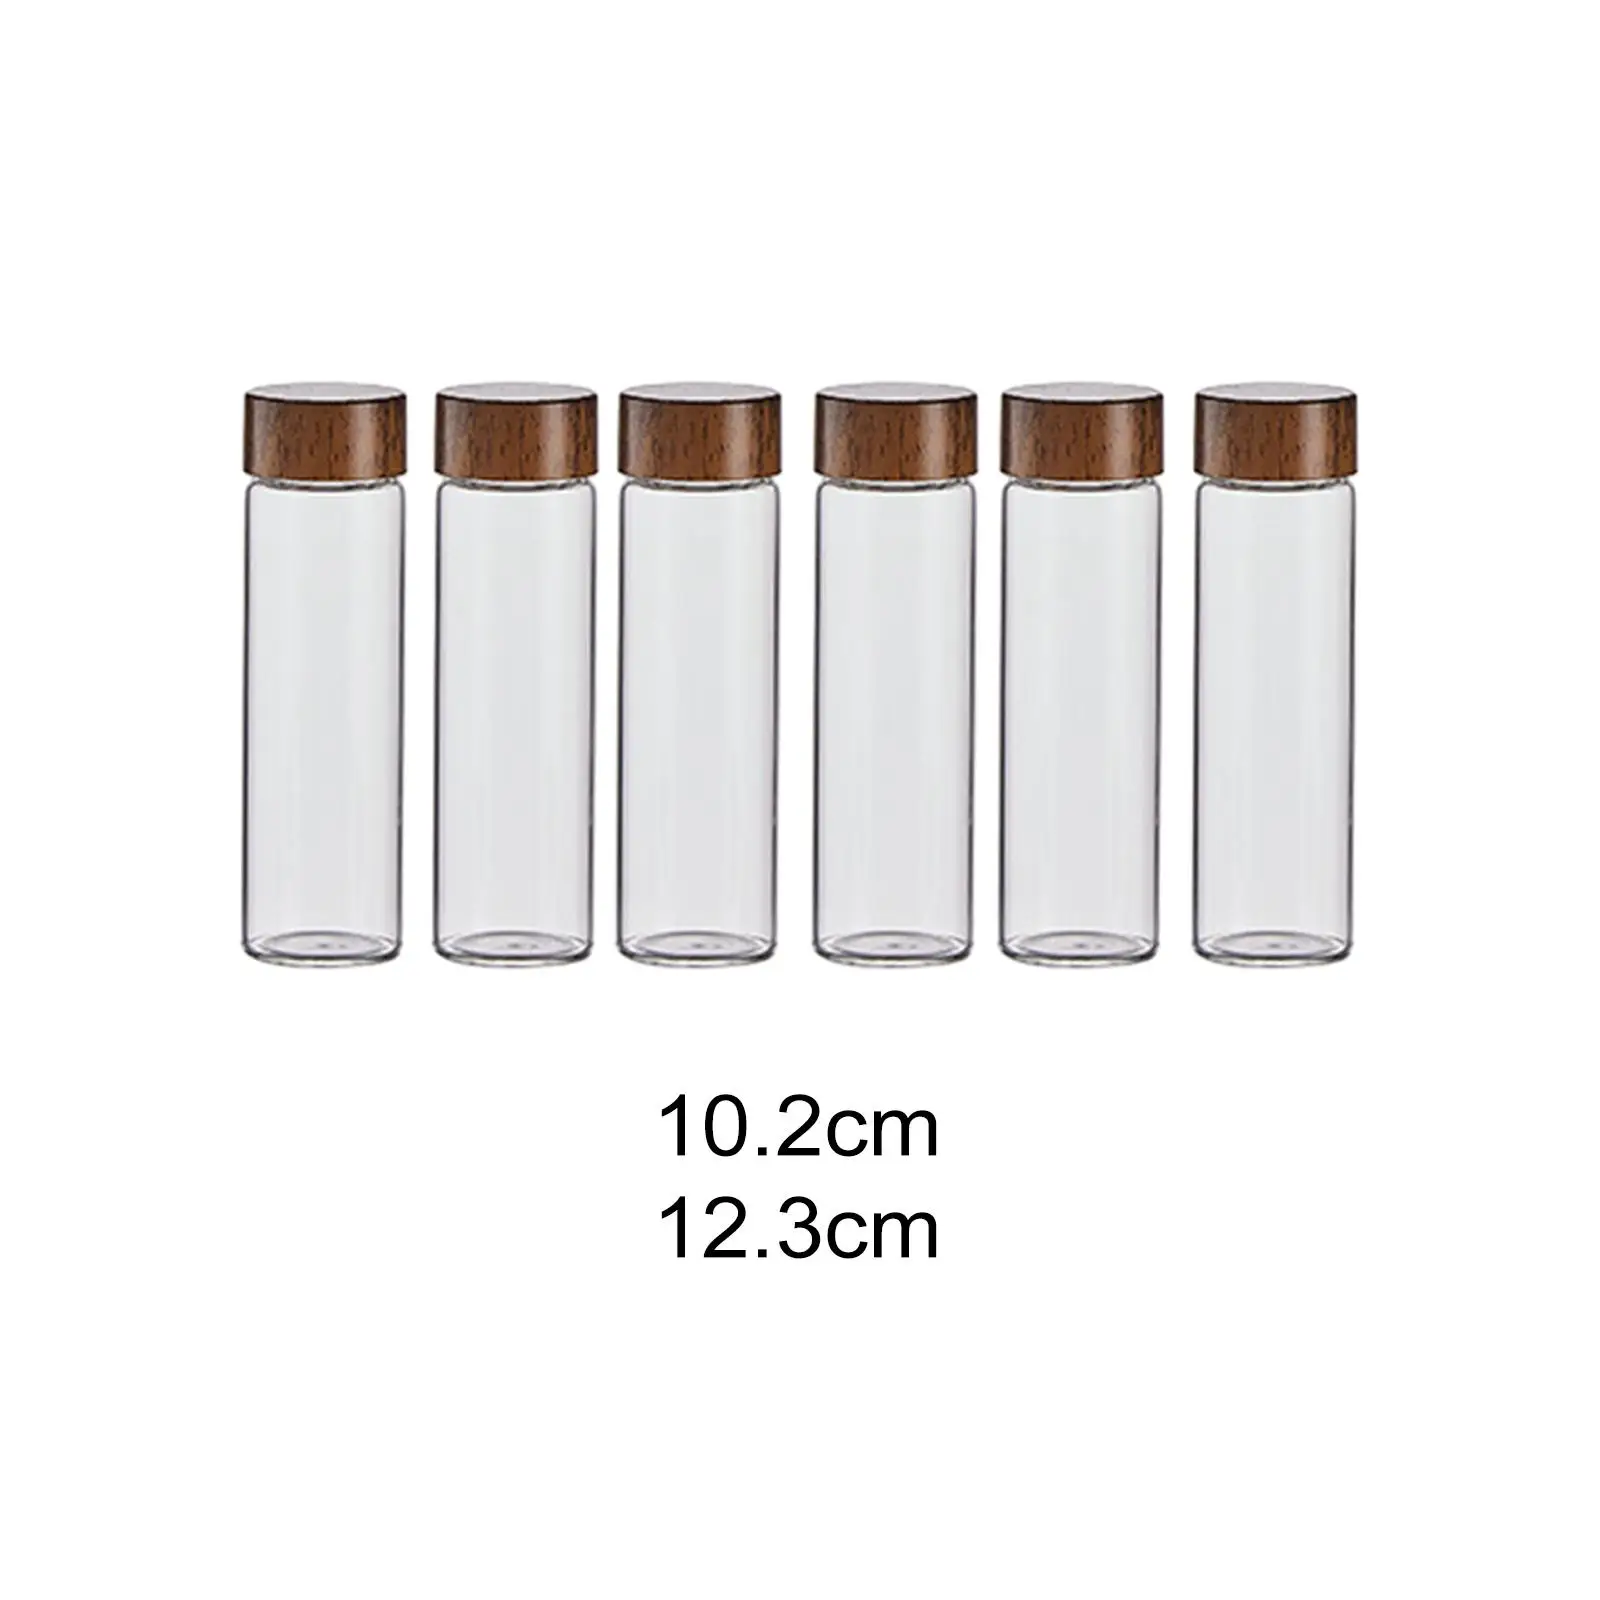 6 Pieces Coffee Bean Jar Glass Coffee Beans Storage Containers for Cafe Bar